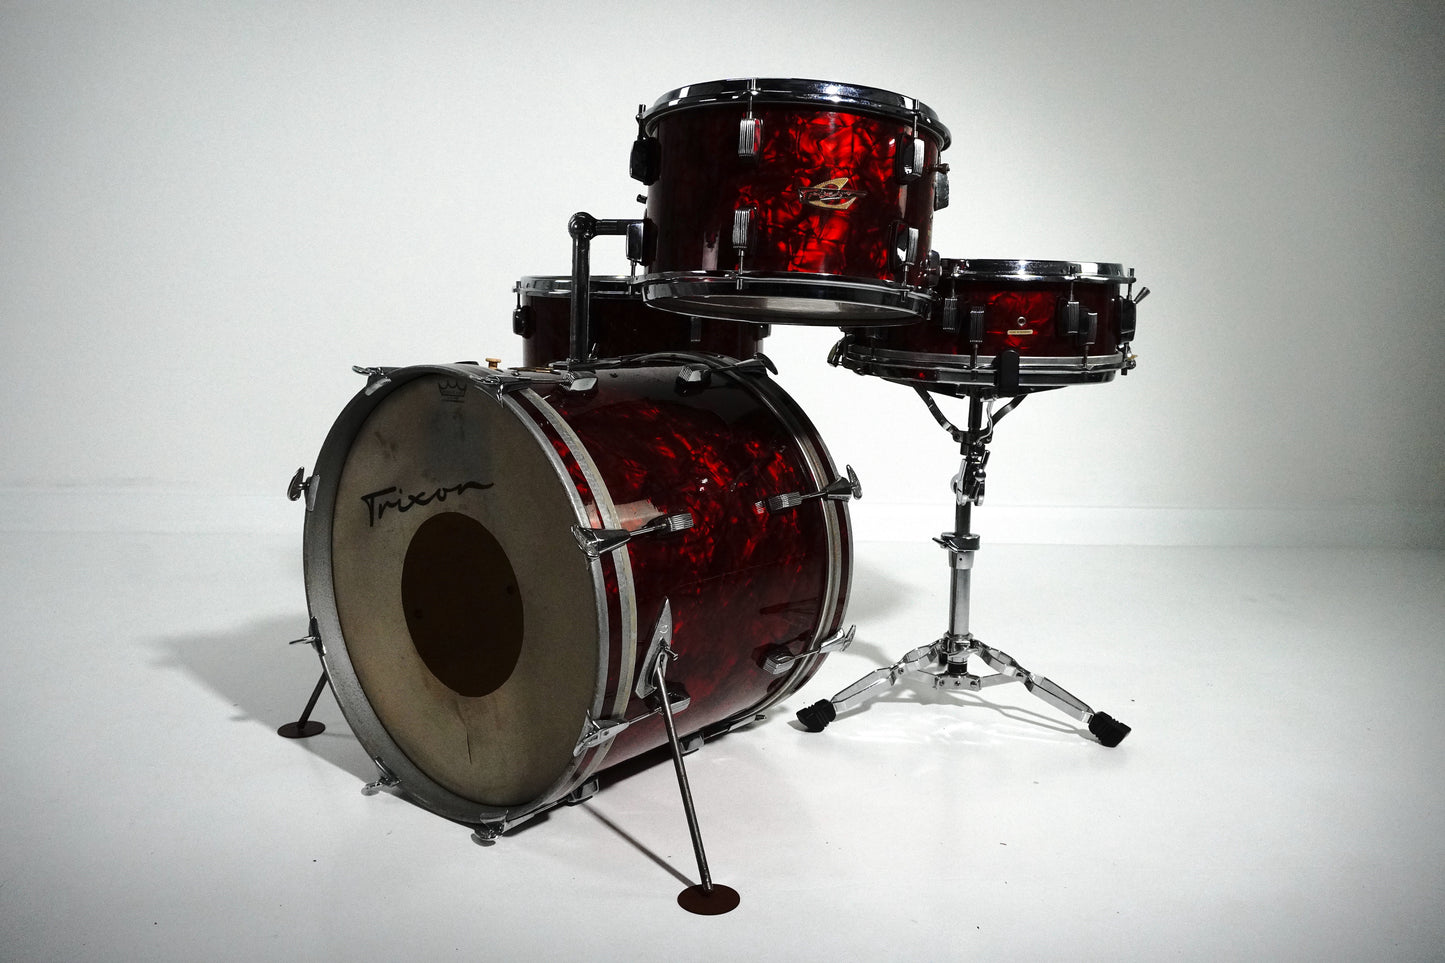 Trixon 4-Piece Luxus in Red Pearl 20,13,16,14